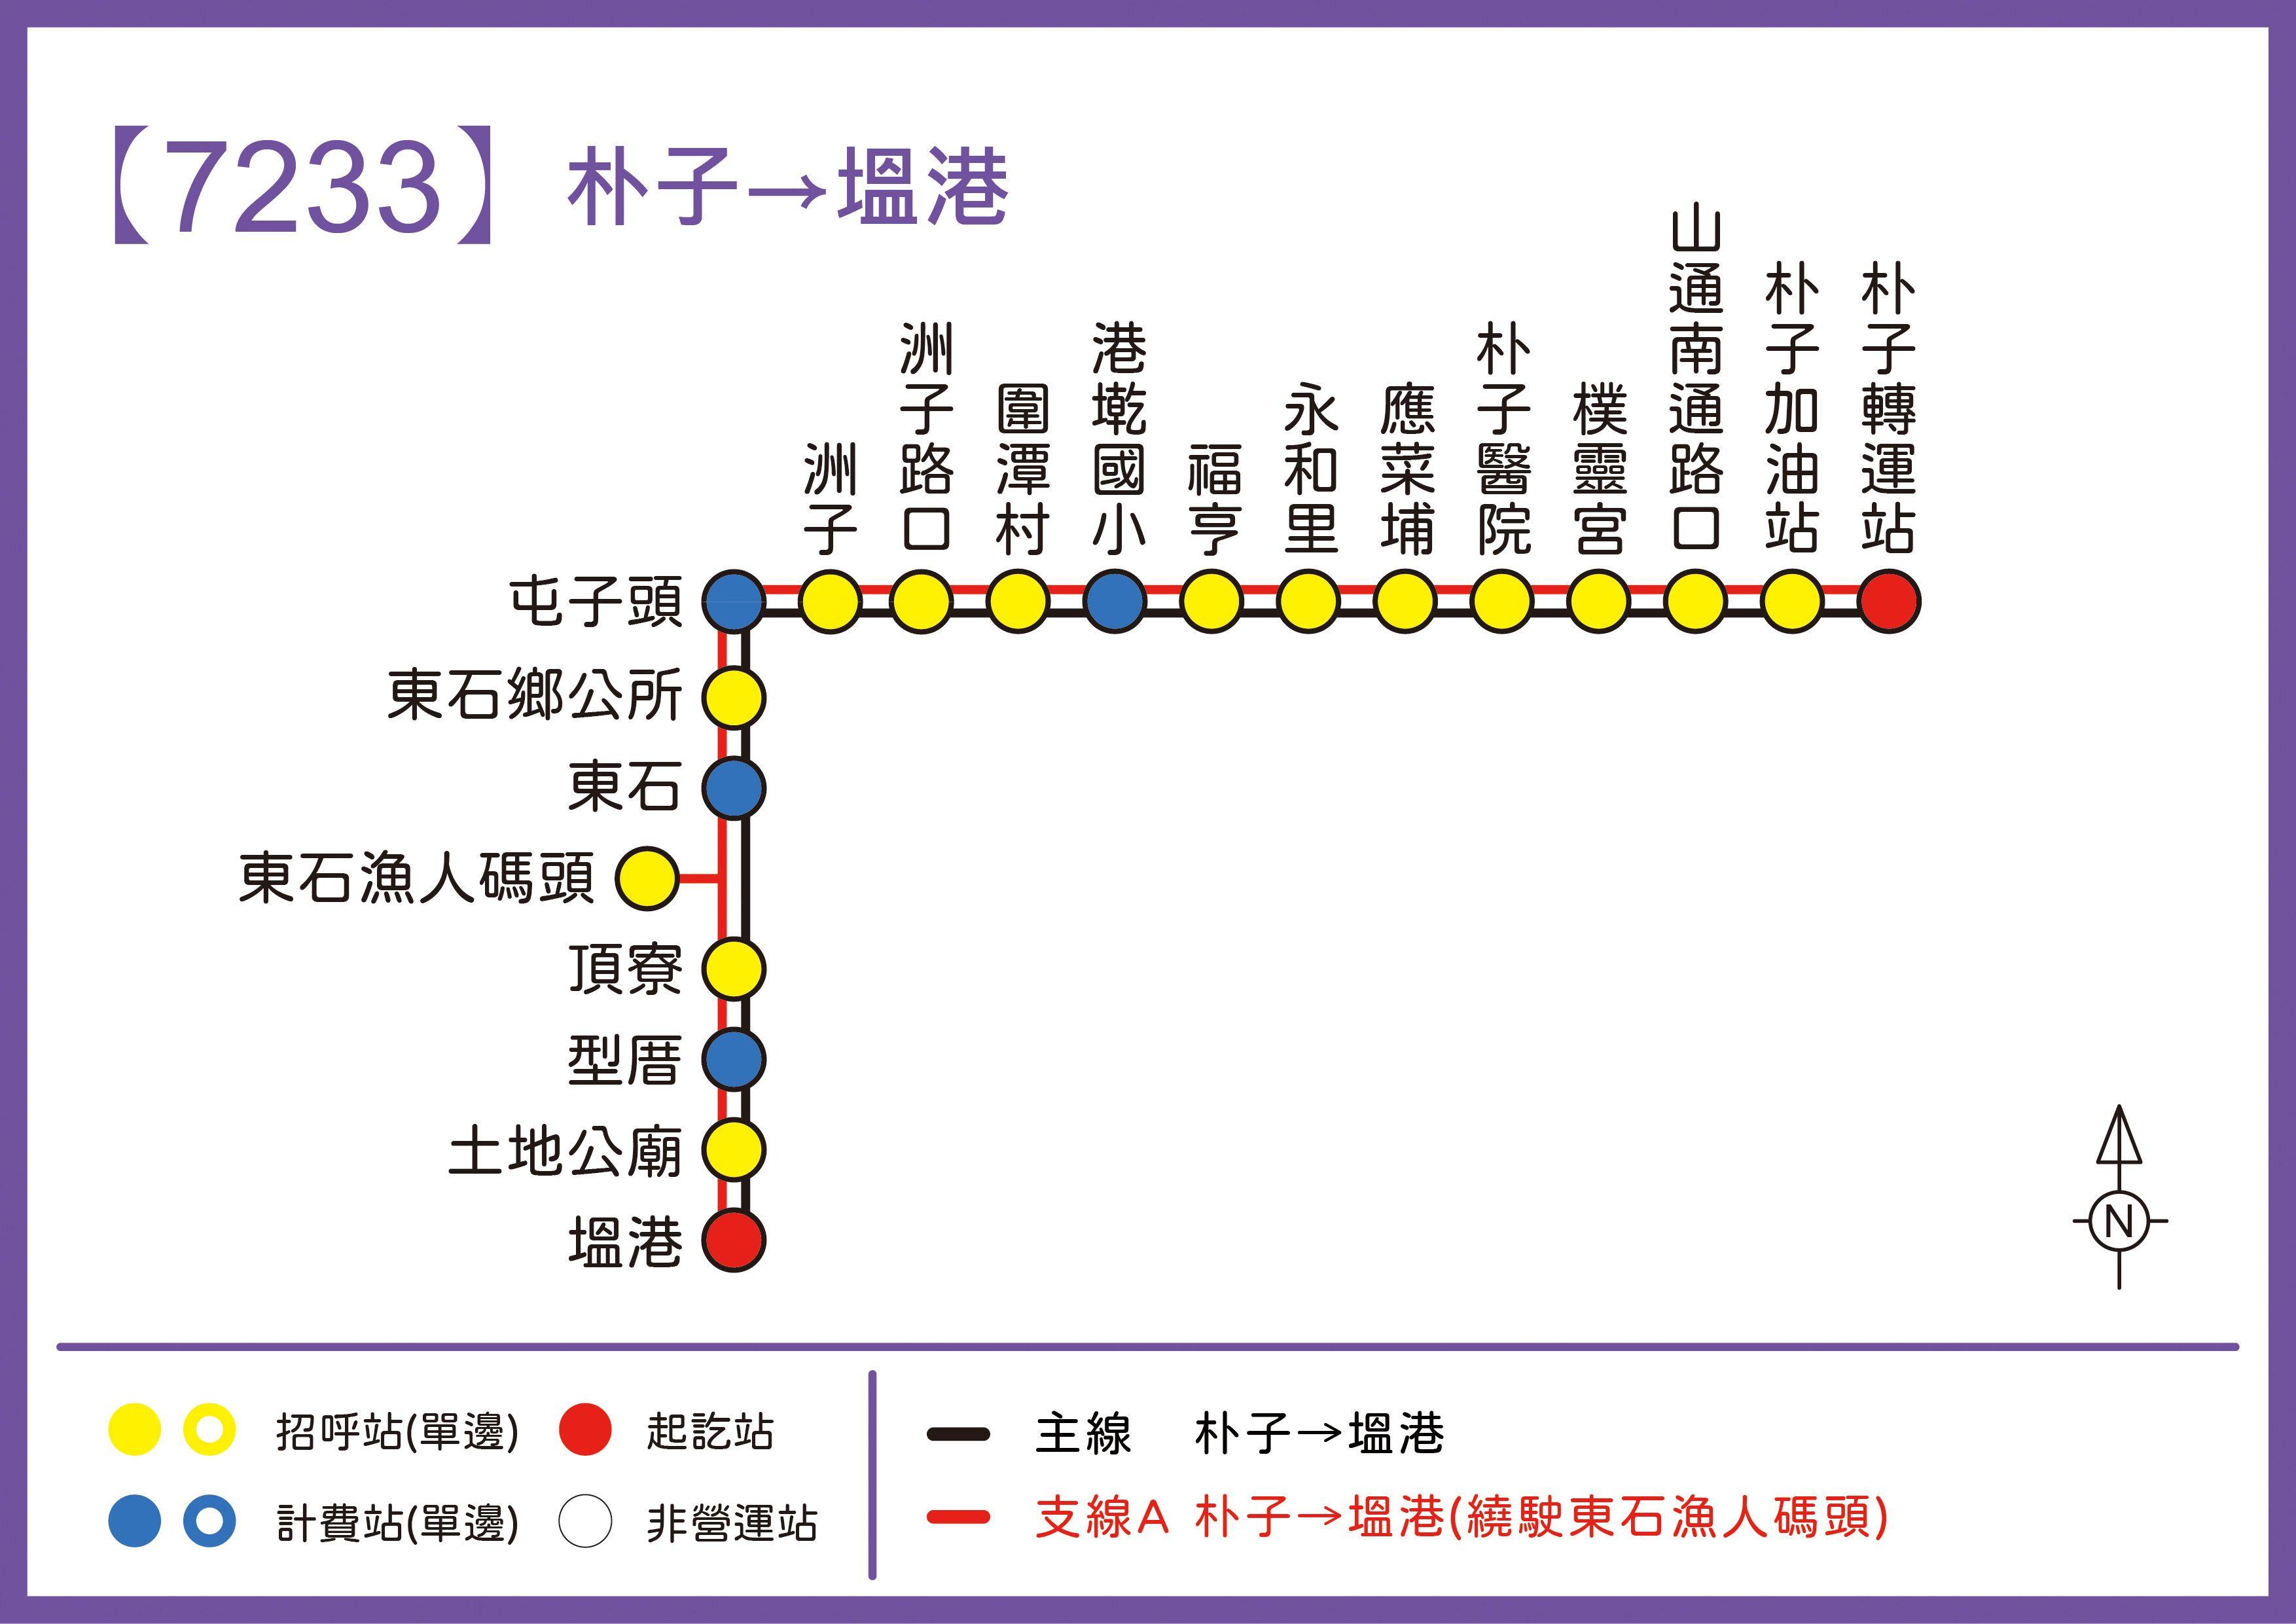 7233Route Map-Chiayi Bus